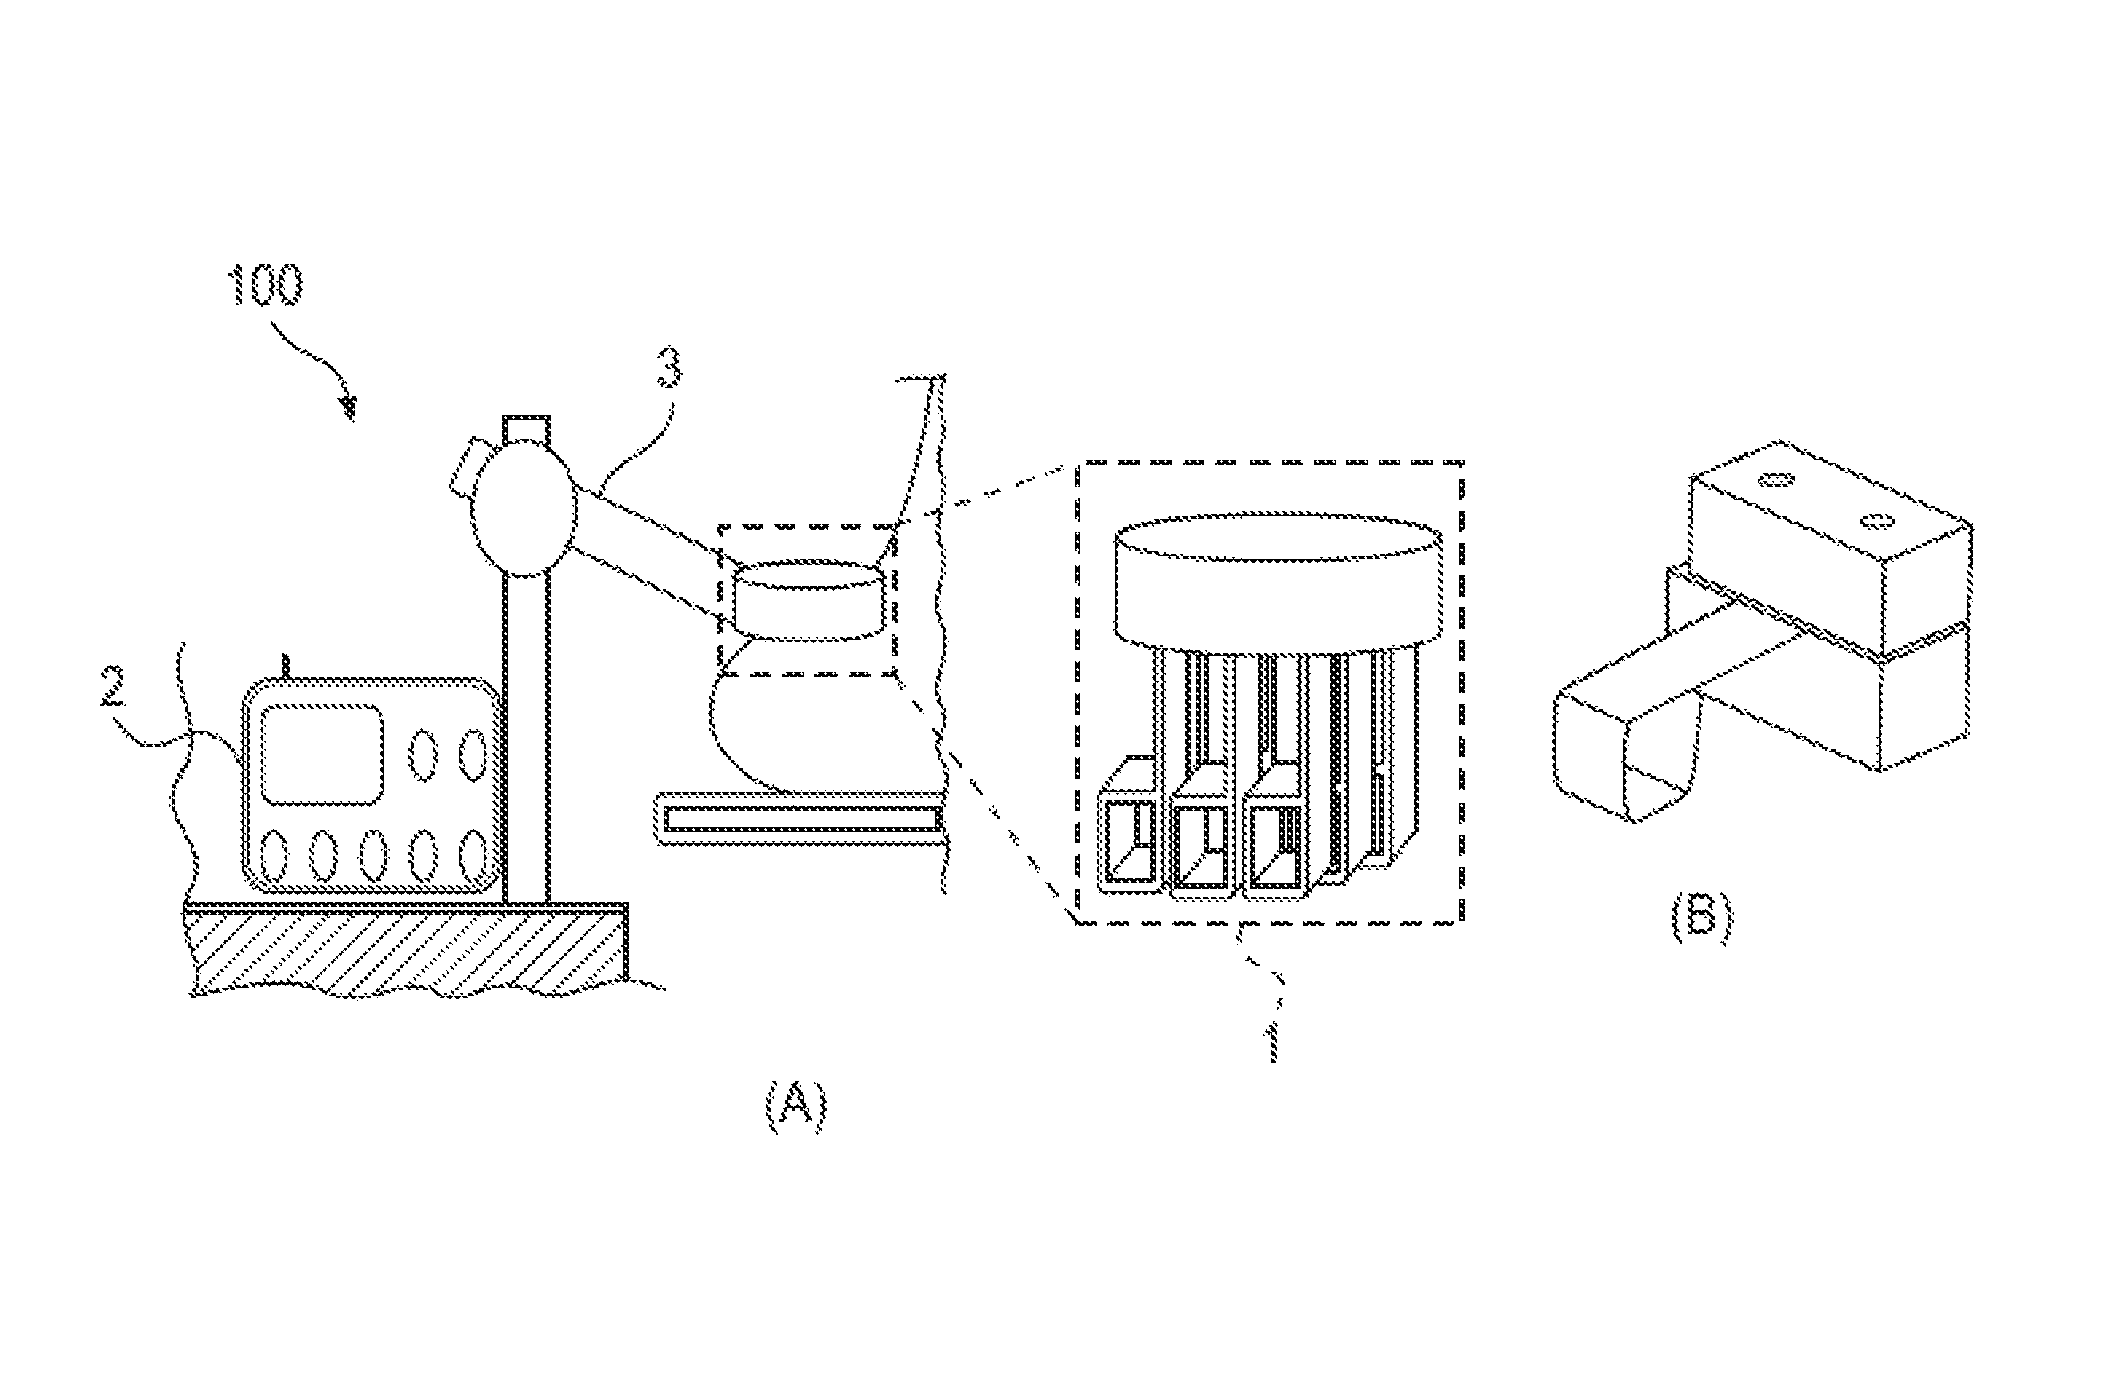 System and method for evaluating tissue